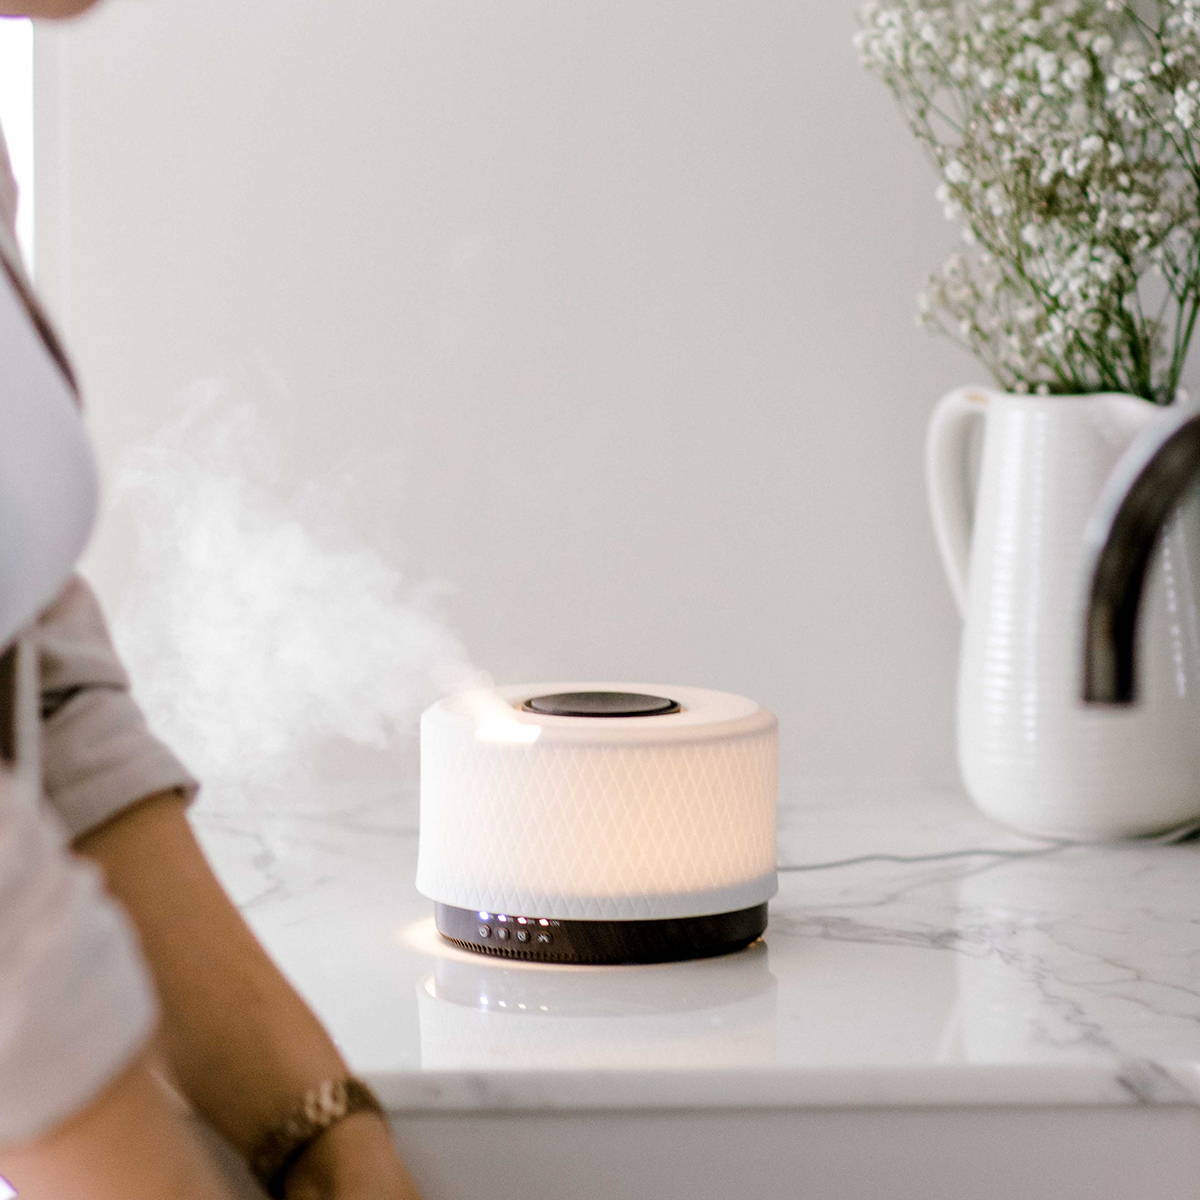 Diffuser mist on and diffusing essential oils